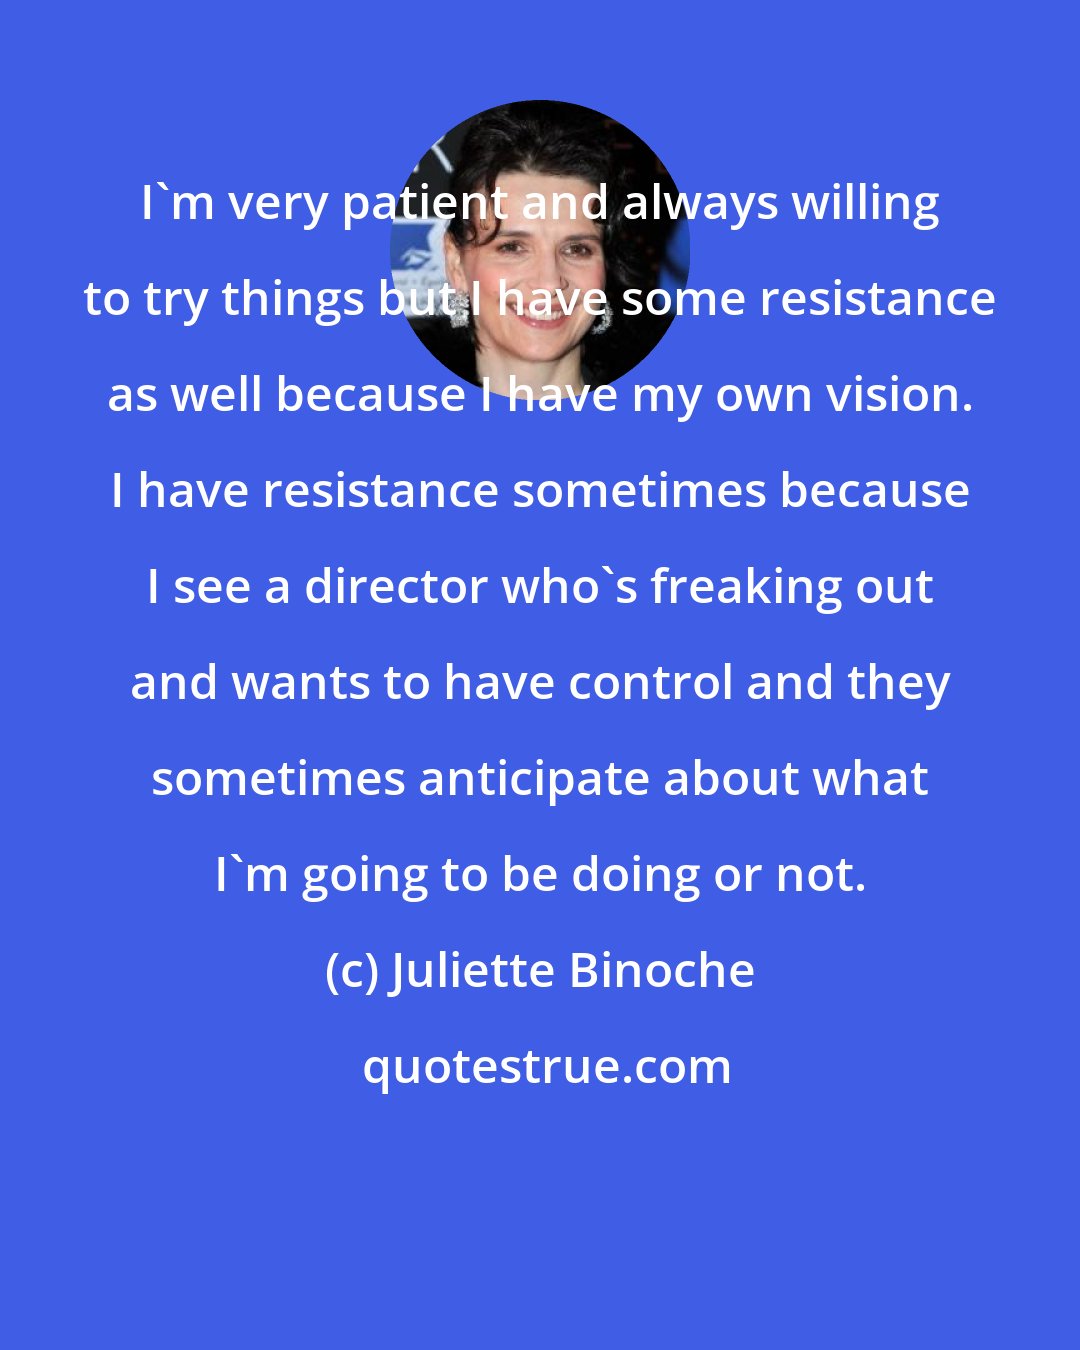 Juliette Binoche: I'm very patient and always willing to try things but I have some resistance as well because I have my own vision. I have resistance sometimes because I see a director who's freaking out and wants to have control and they sometimes anticipate about what I'm going to be doing or not.